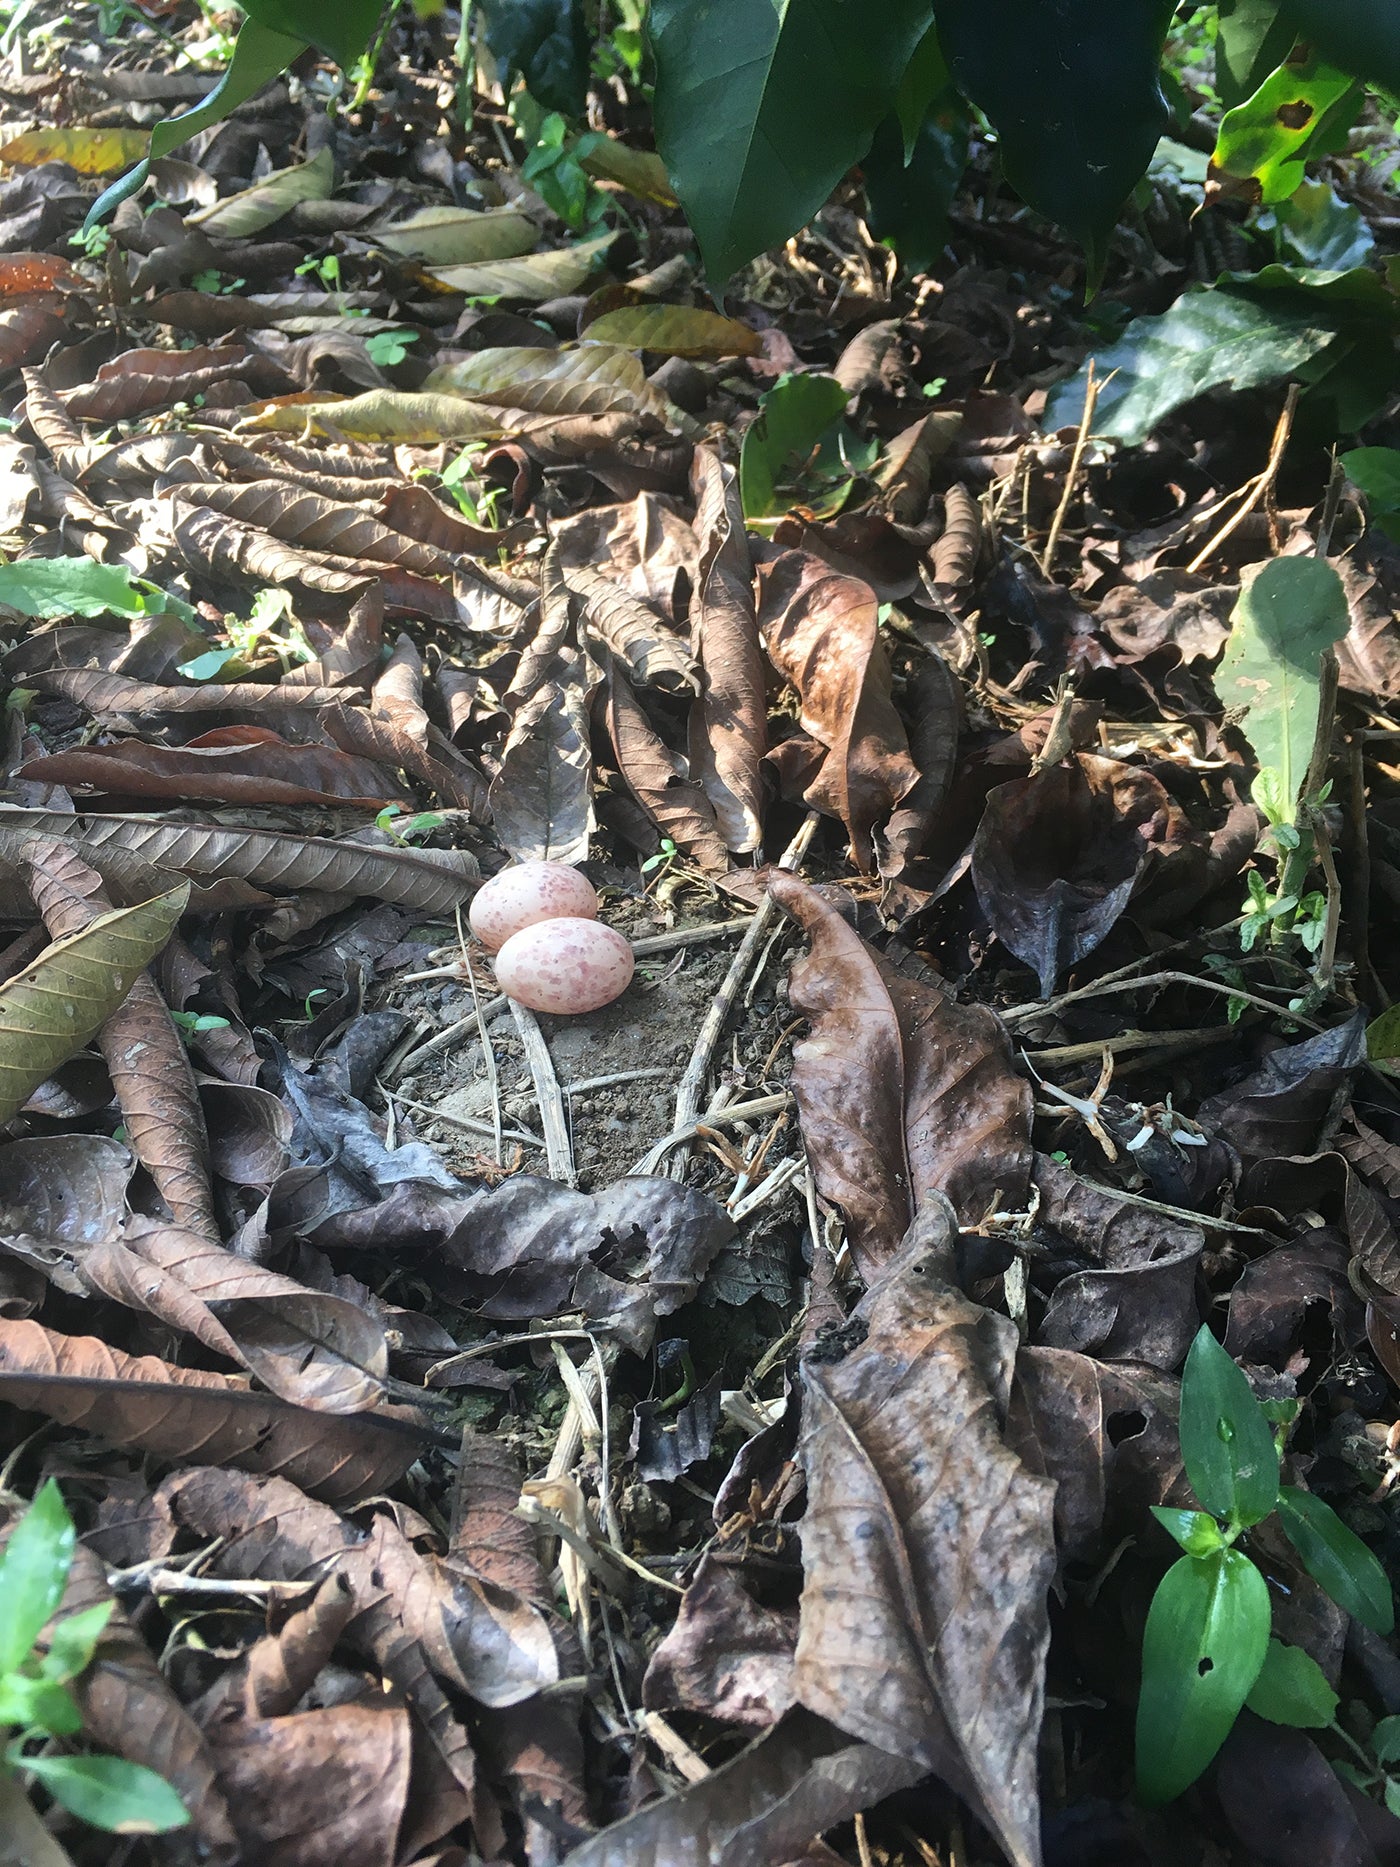 Two speckled eggs on the ground surrounded by leaves